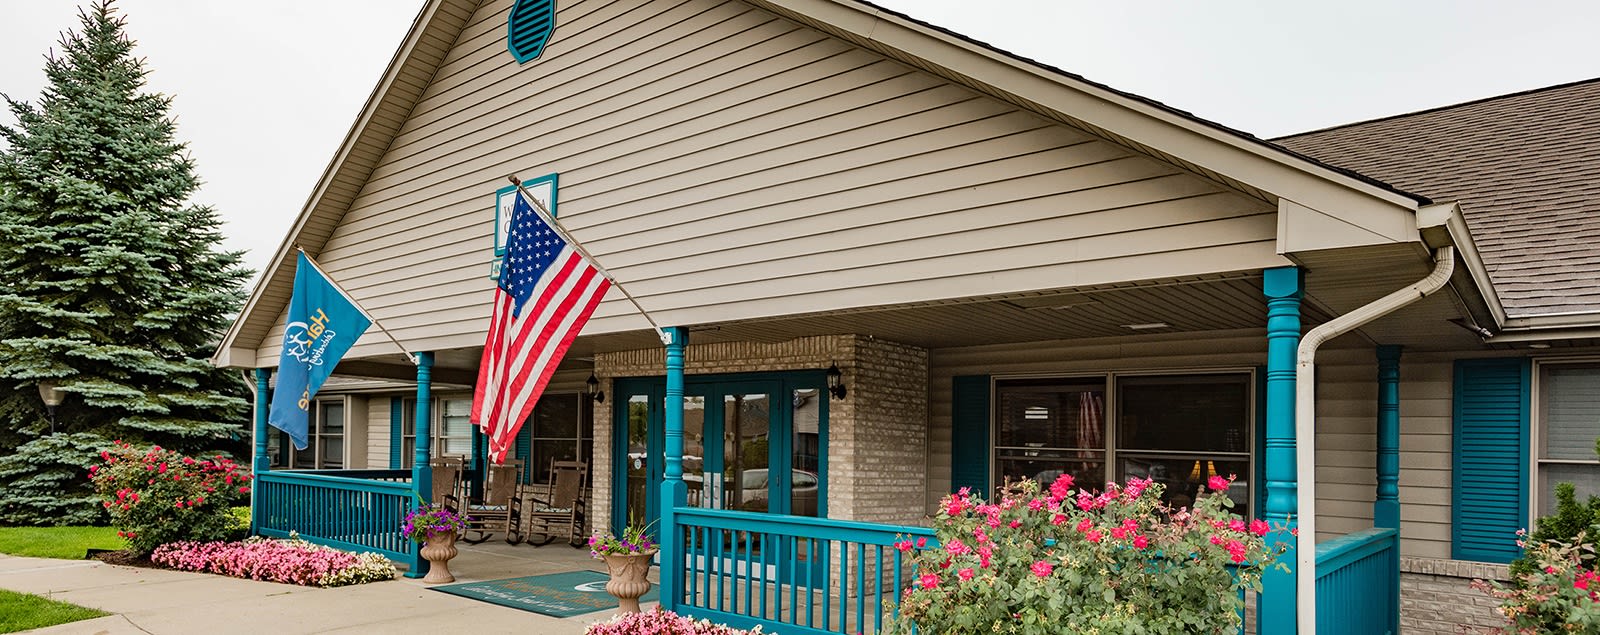 Schedule a senior living tour in Sterling Heights